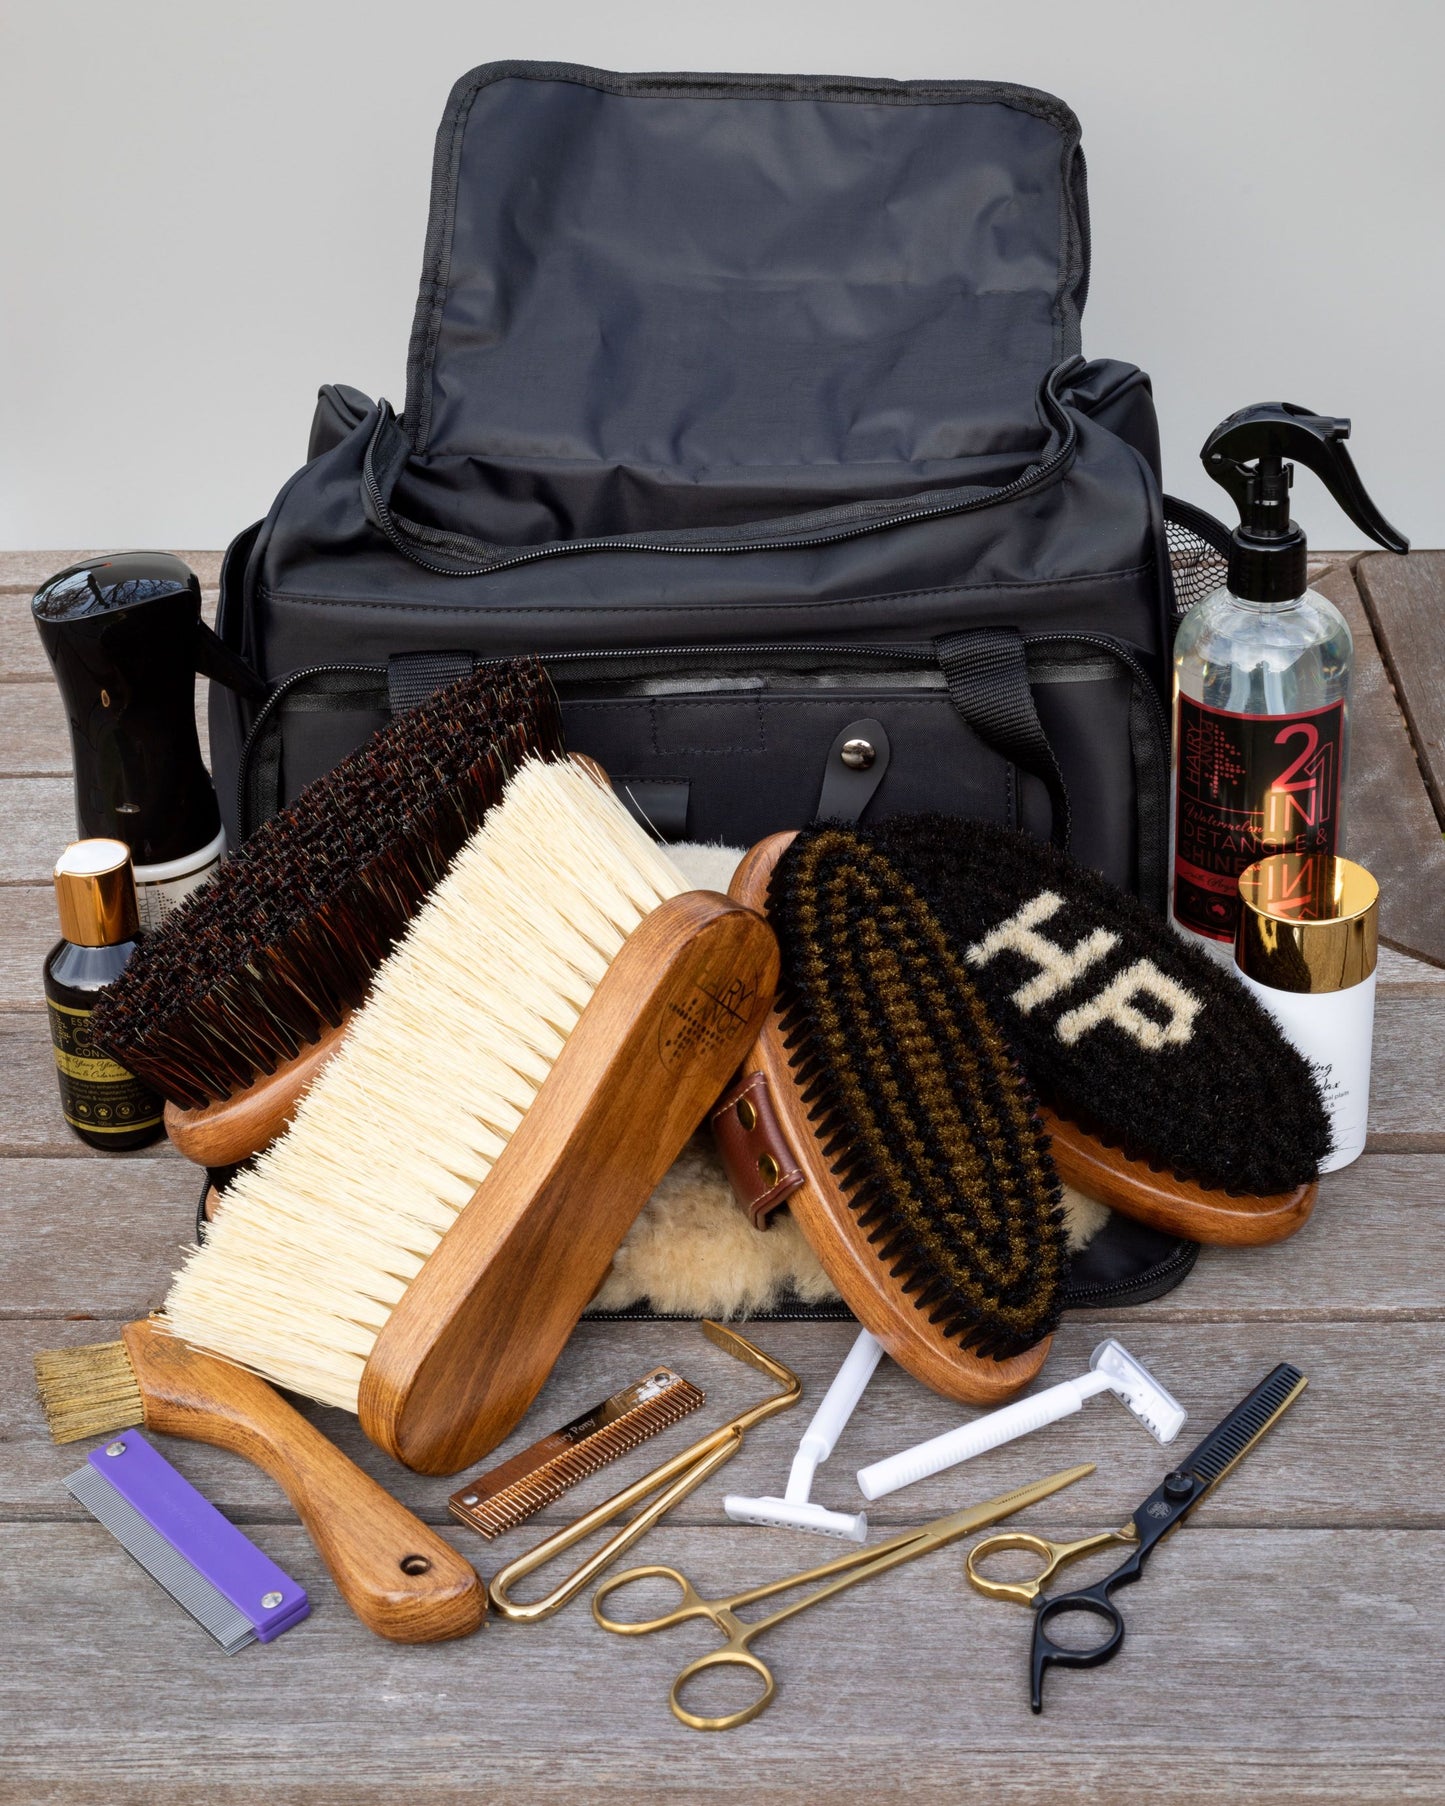 A view of various Hairy Pony grooming products including the Hairy Pony Flick Brush.